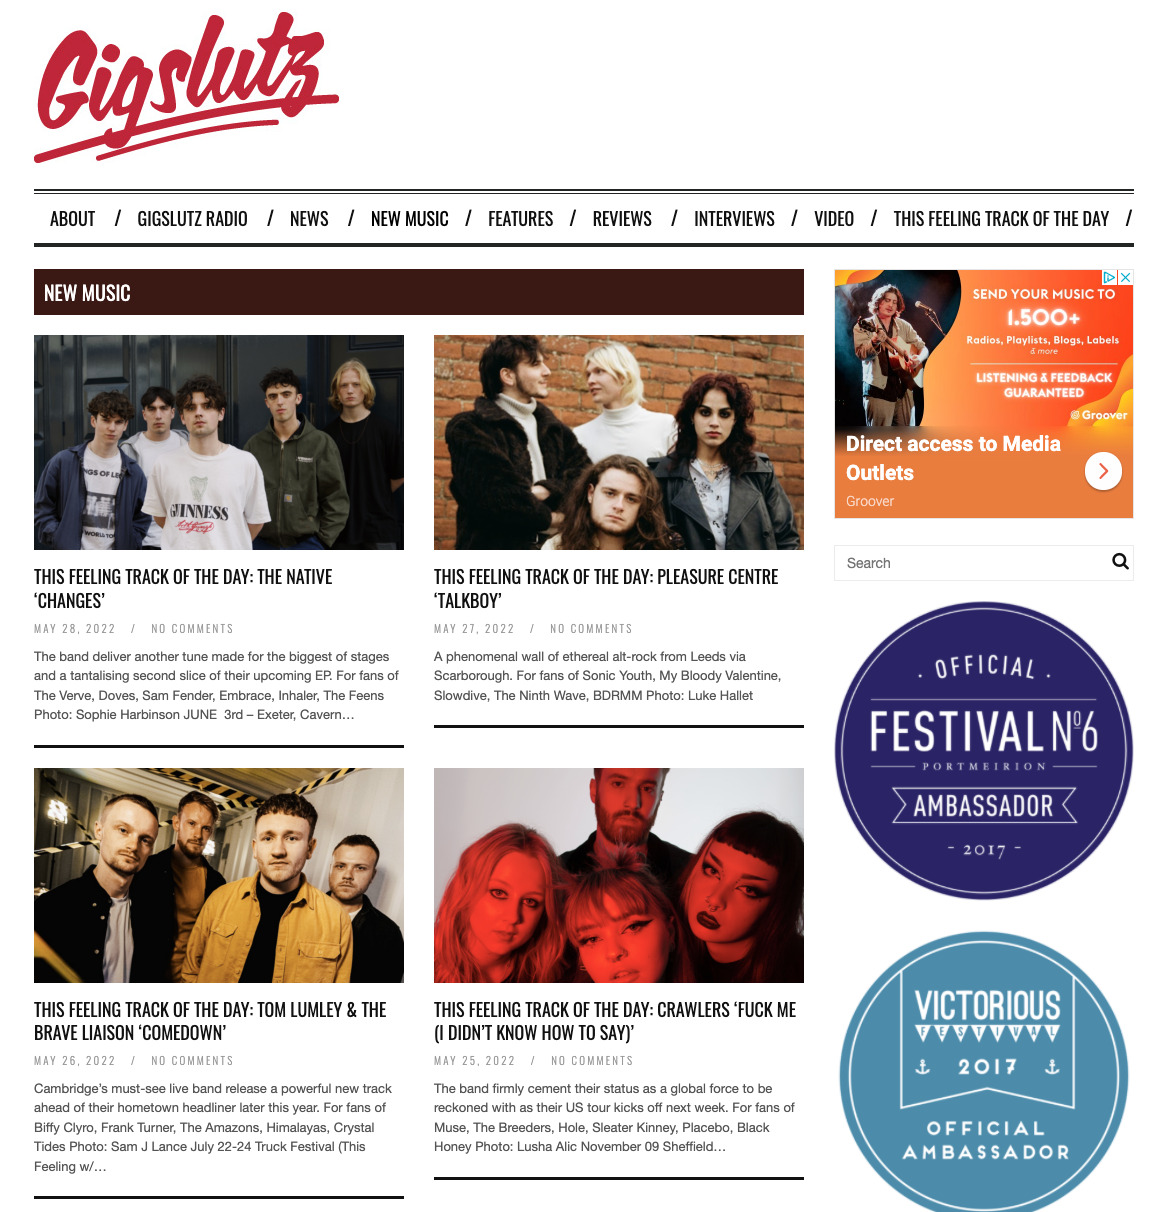 Example of a music journalist's website